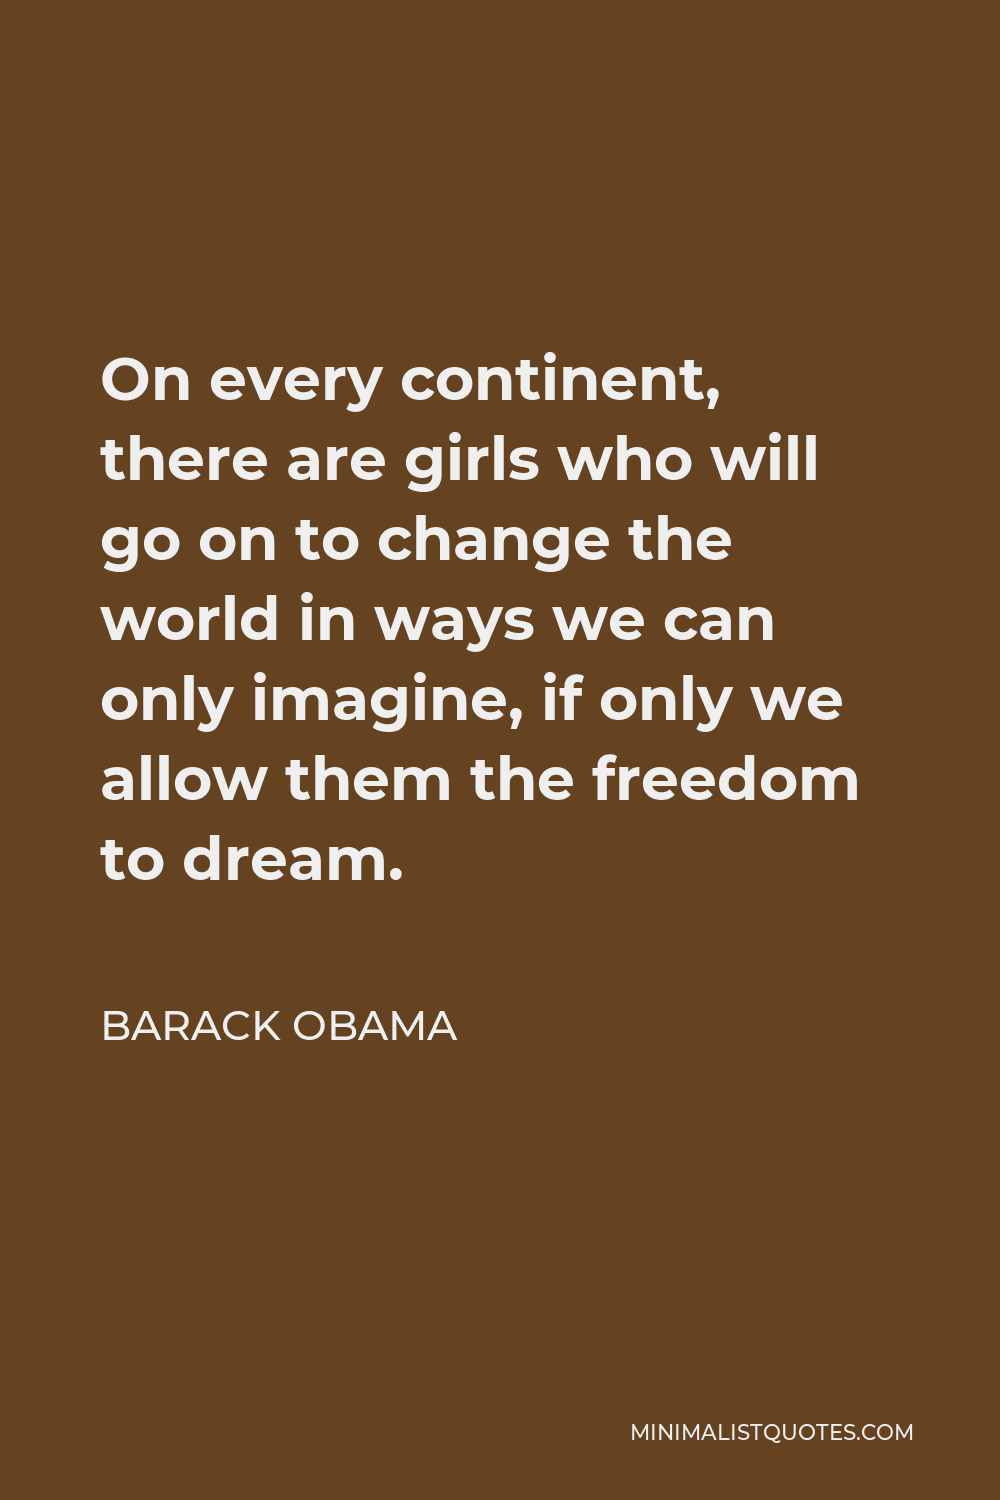 Barack Obama Quote - On every continent, there are girls who will go on to change the world in ways we can only imagine, if only we allow them the freedom to dream.